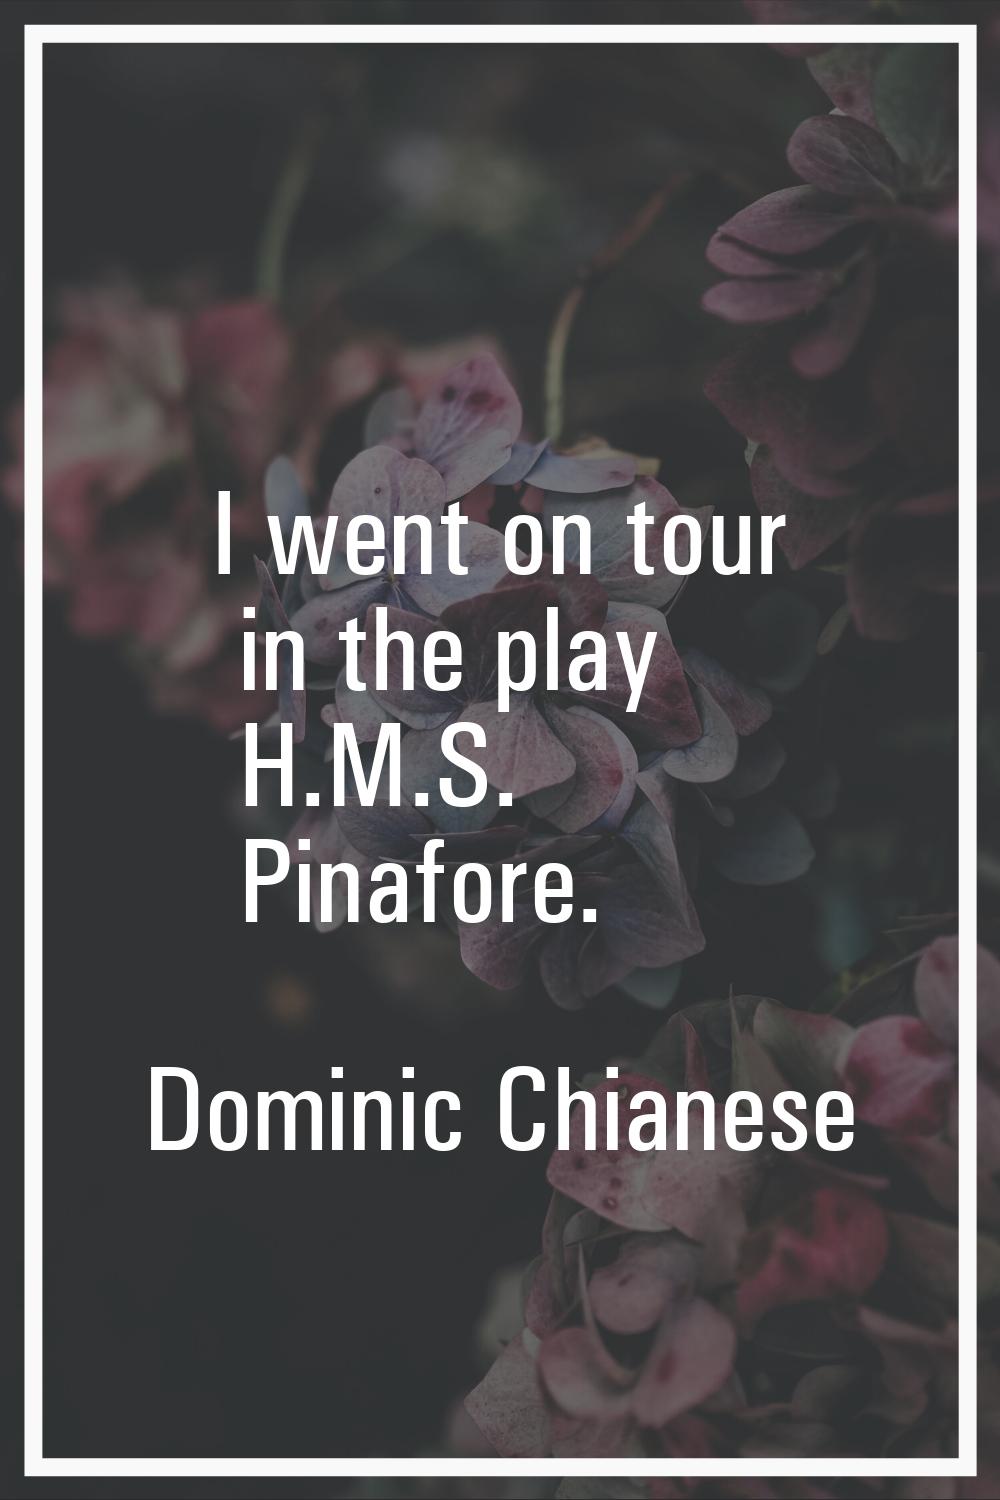 I went on tour in the play H.M.S. Pinafore.